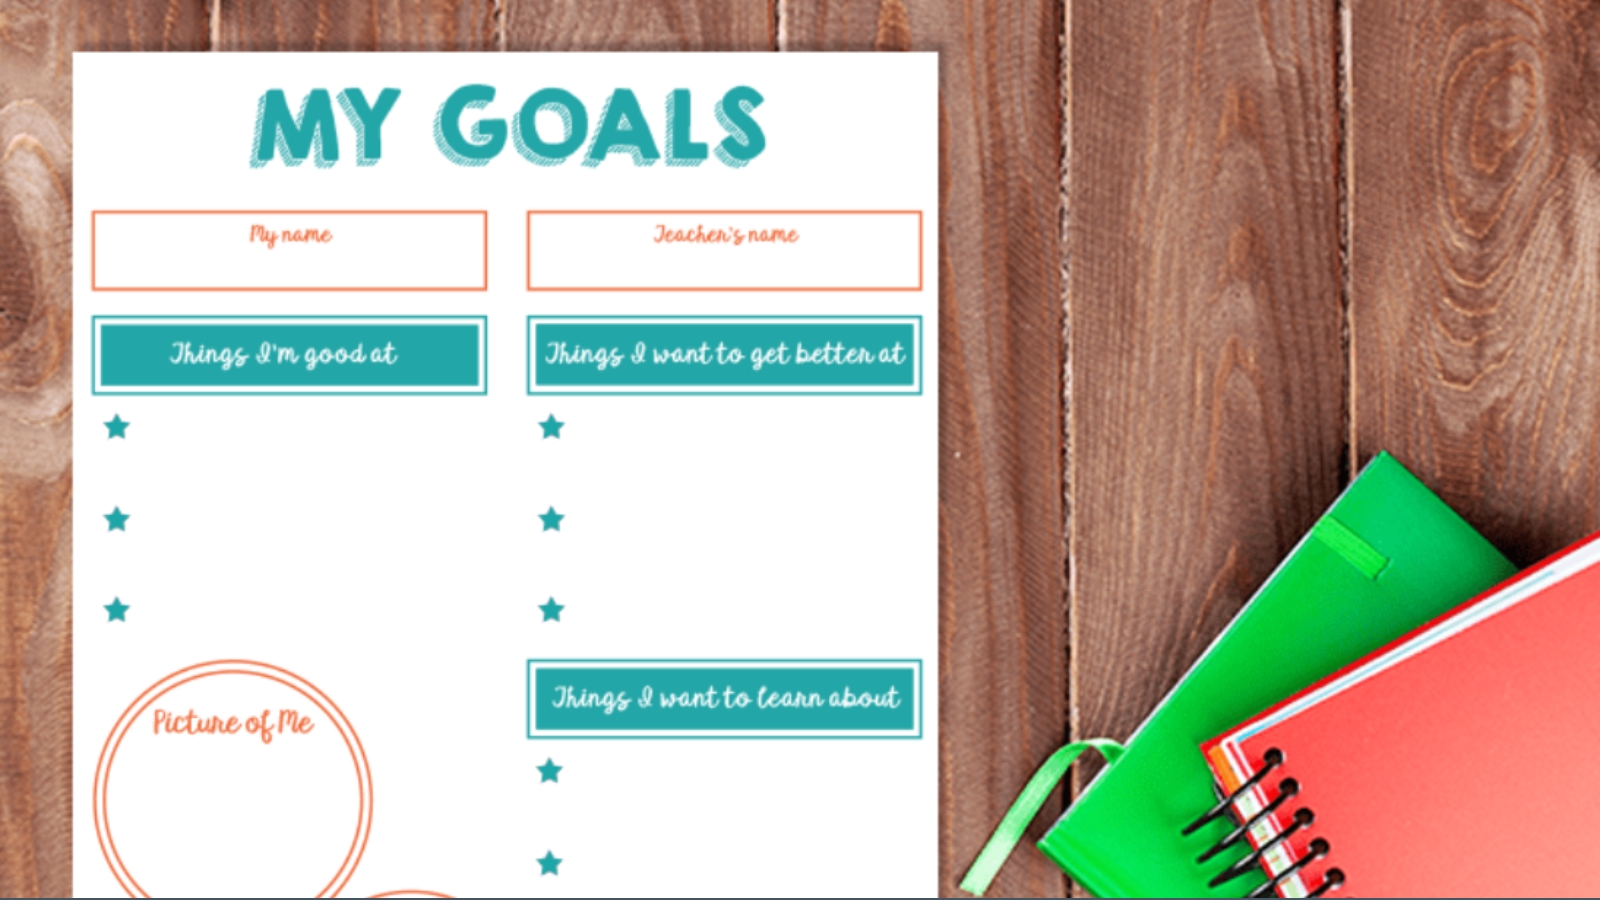 Picture of a goal setting worksheet.